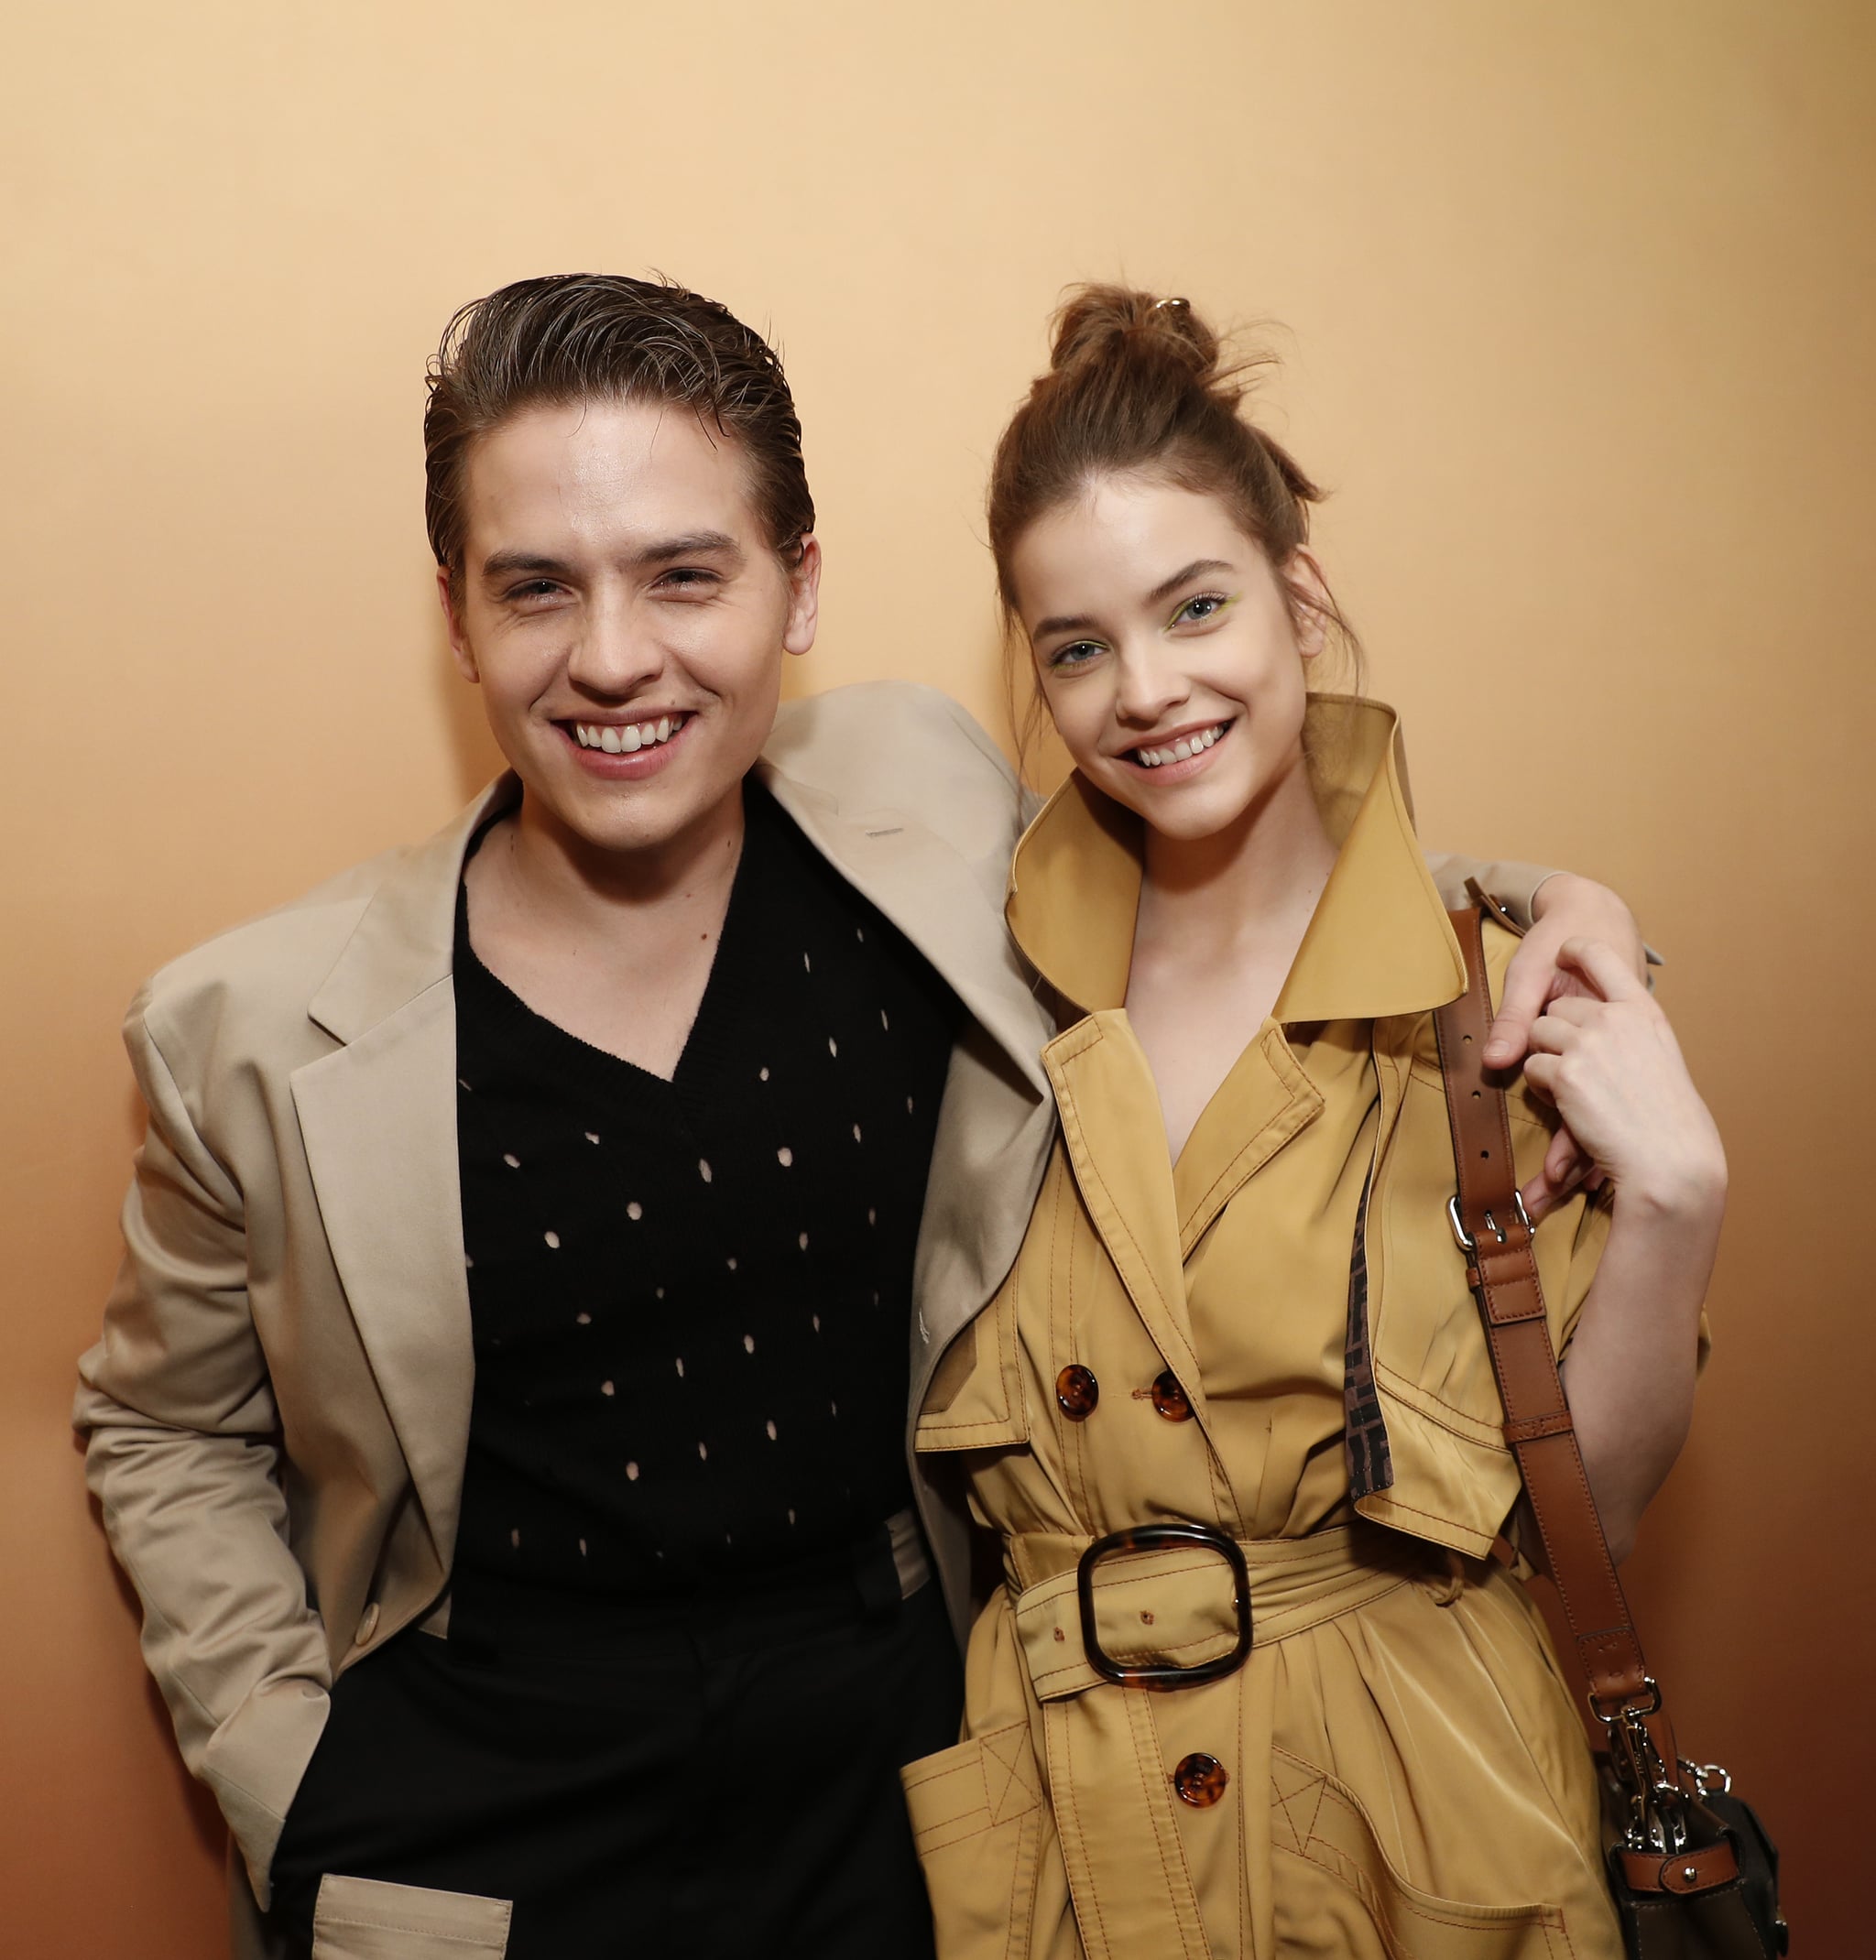 NEW YORK, NEW YORK - FEBRUARY 05: Dylan Sprouse and Barbara Palvin attend The Launch of Solar Dream hosted by Fendi on February 05, 2020 in New York City. (Photo by JP Yim/Getty Images for Fendi)